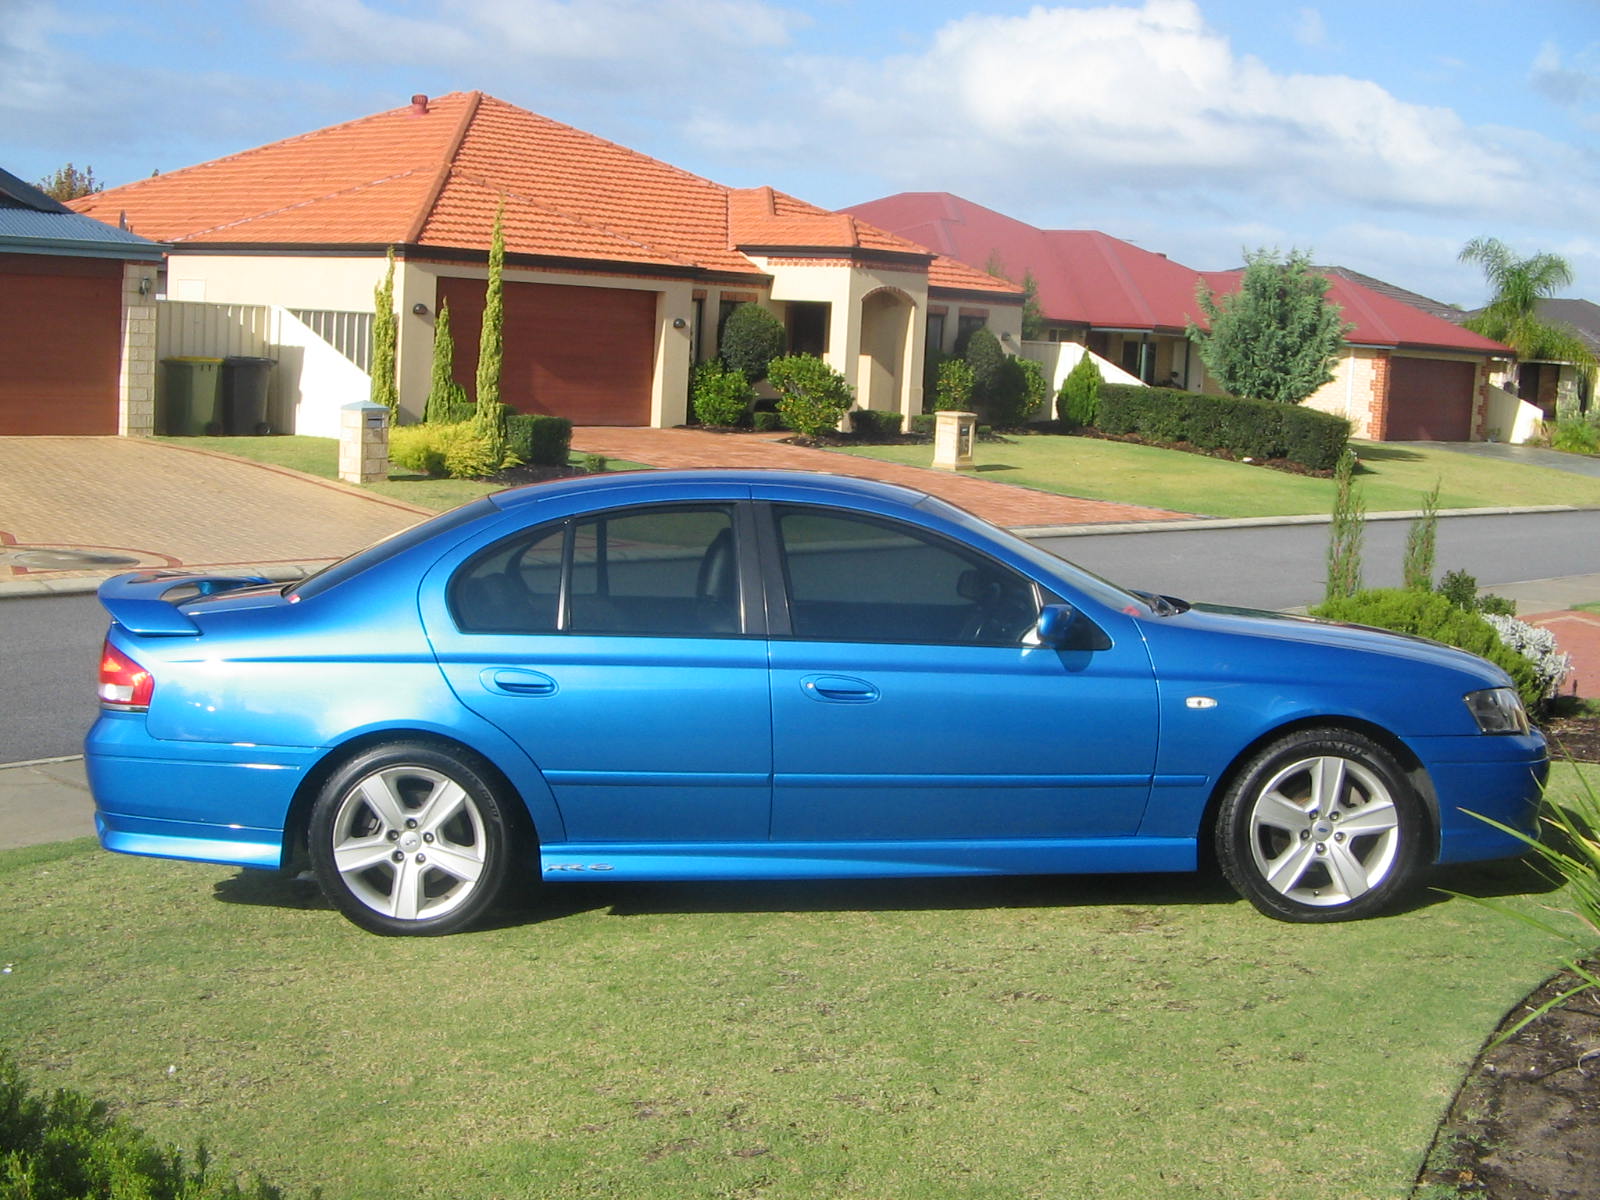 2003  Ford Falcon xr6 turbo picture, mods, upgrades